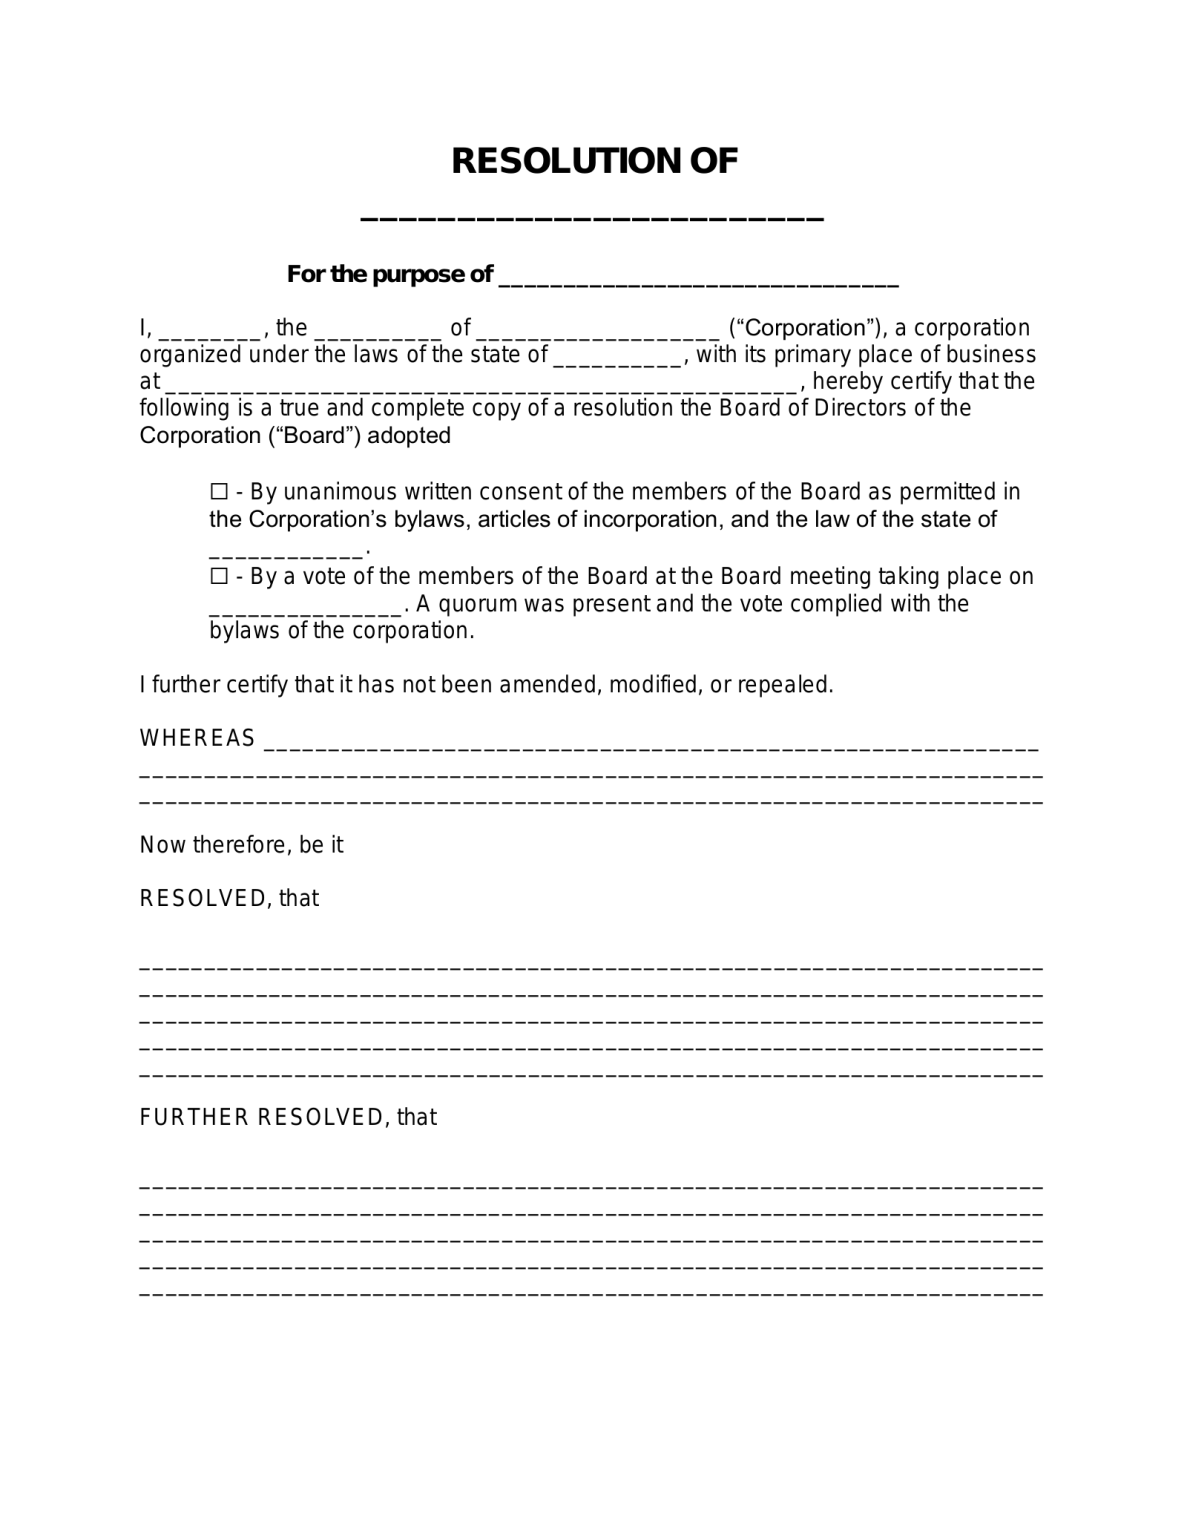 free-corporate-resolution-form-pdf-word-eforms